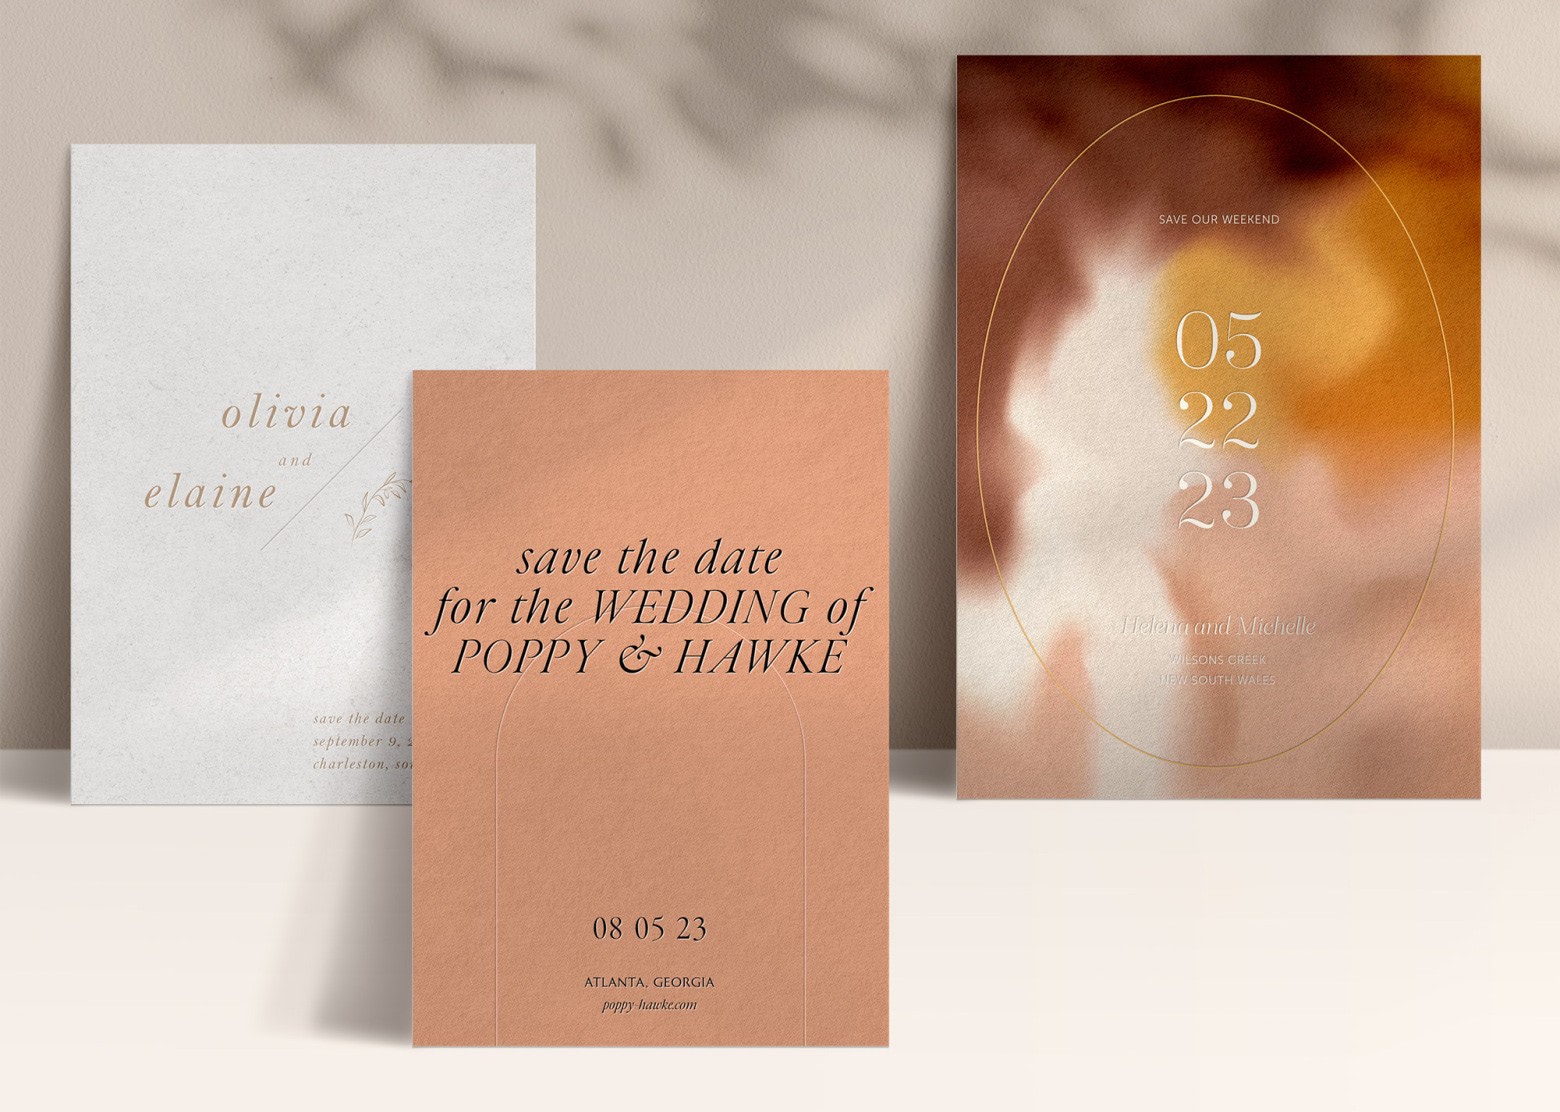 What You Need To Know About Save The Date Etiquette